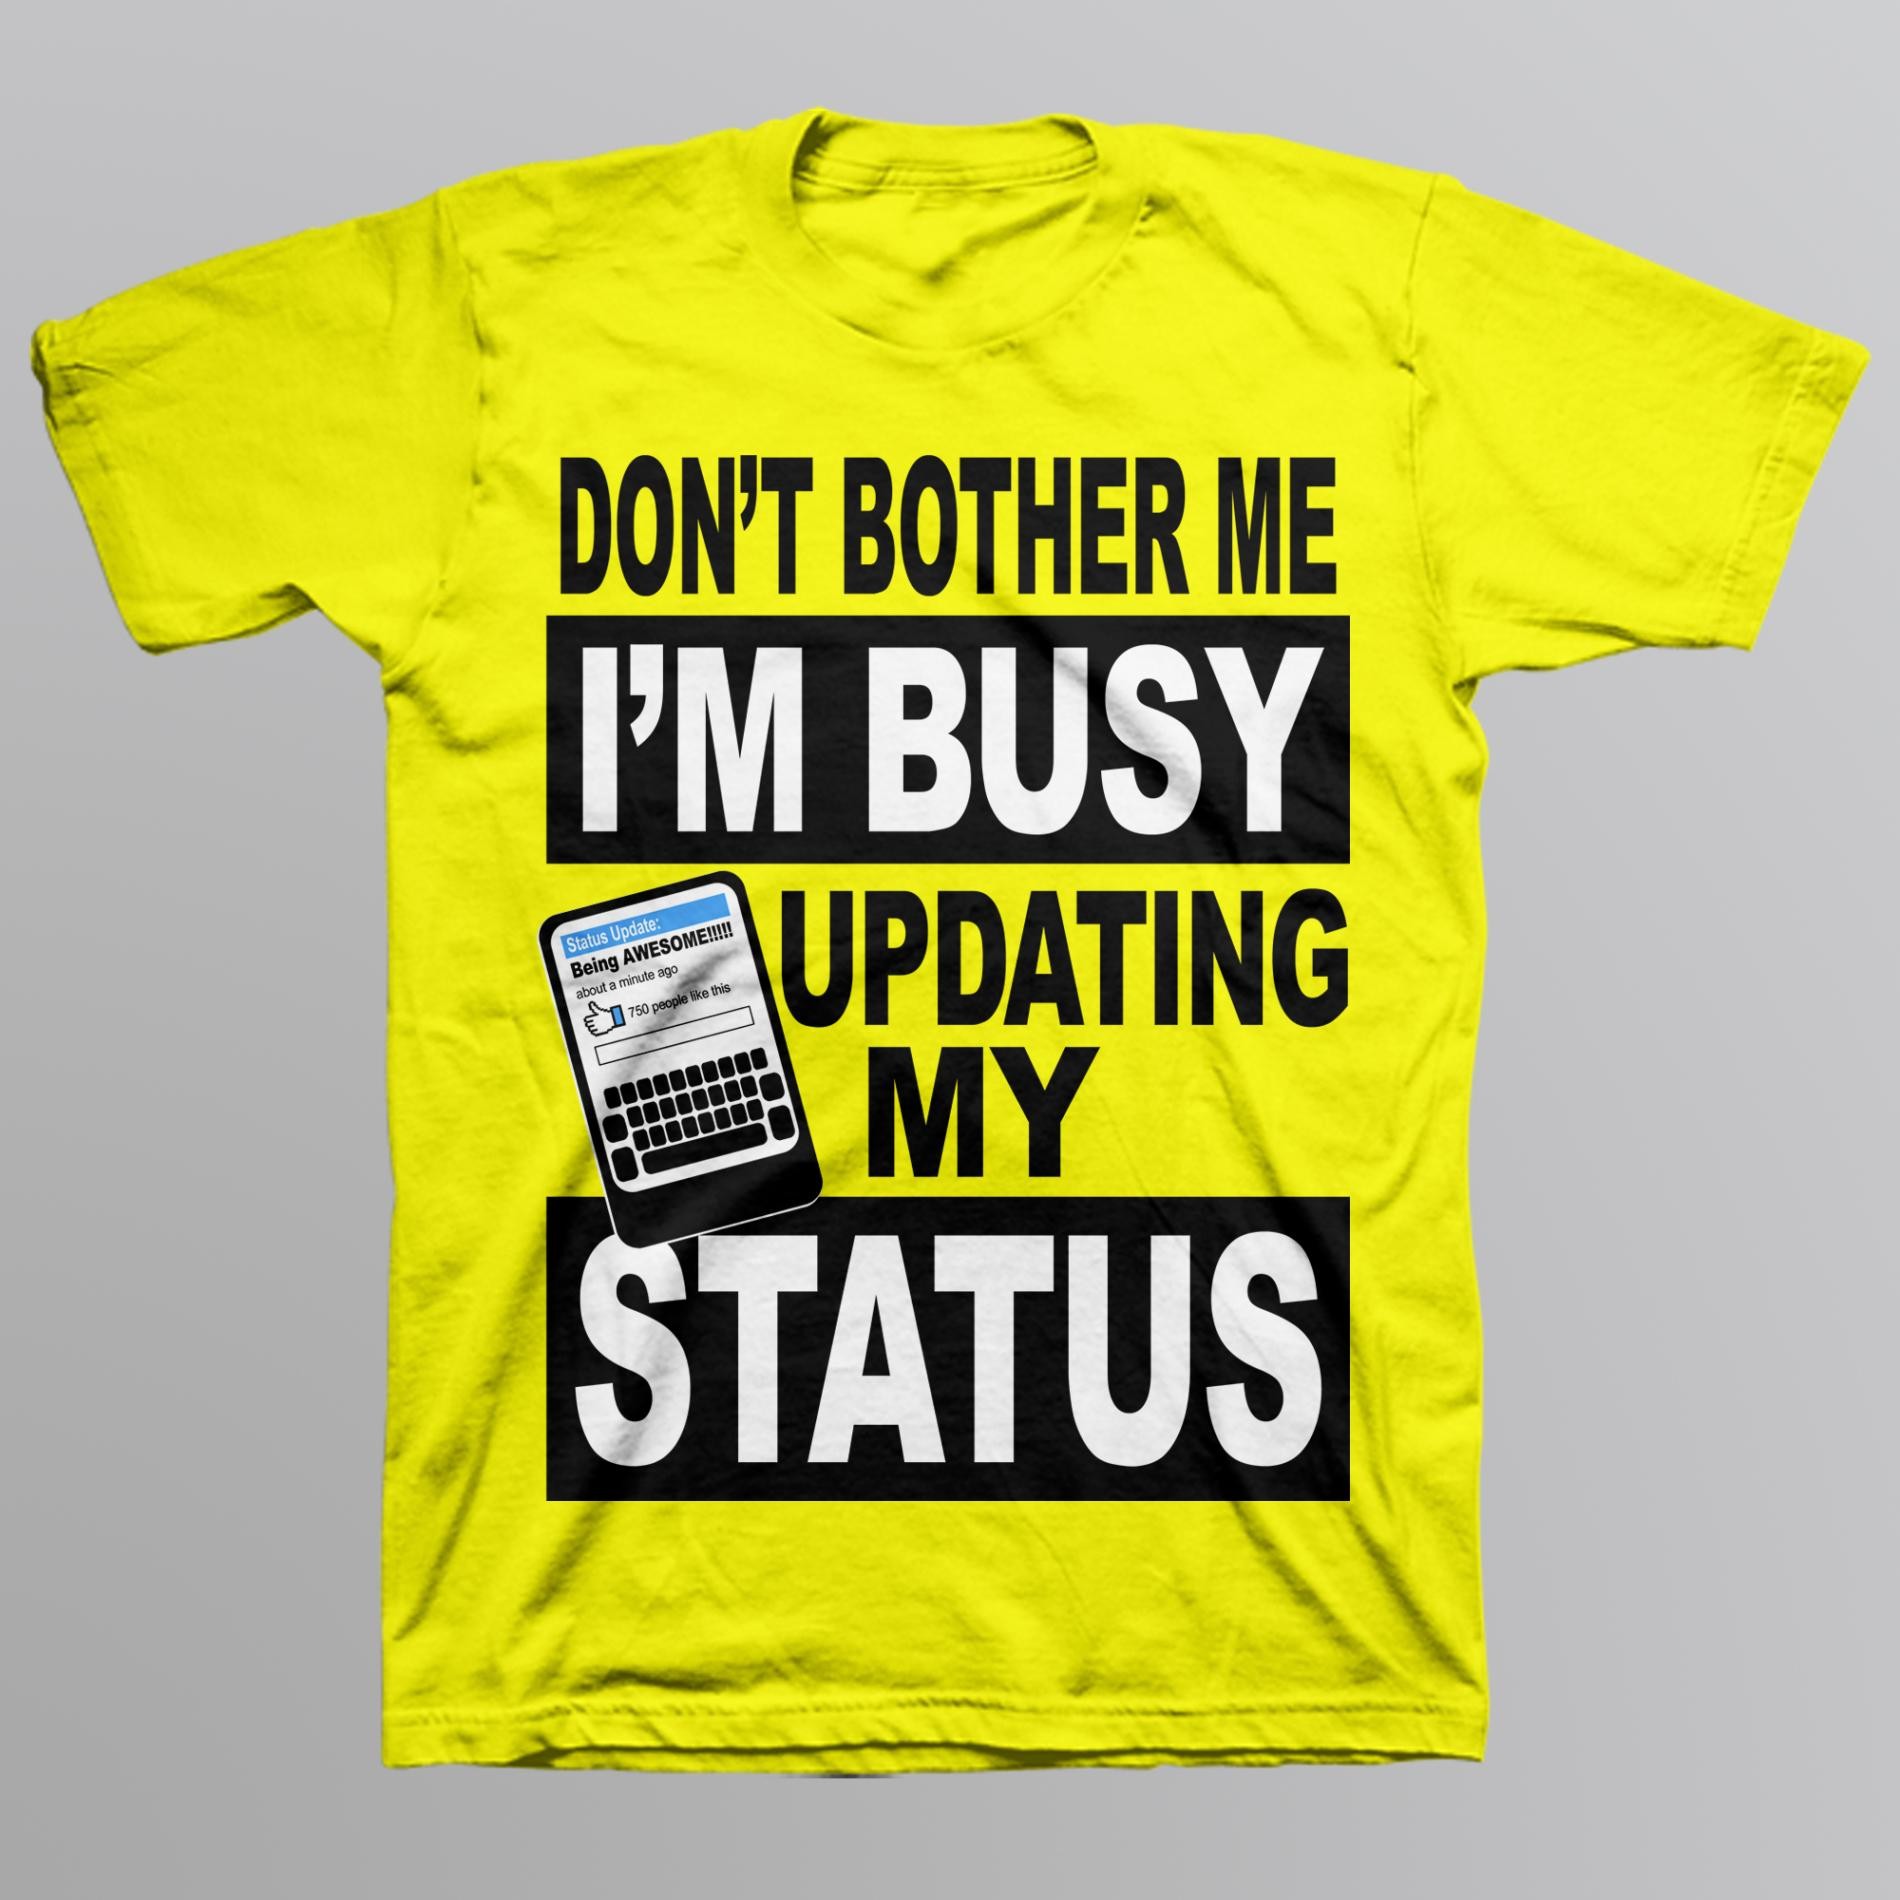 Route 66 Boy's Graphic T-Shirt - Busy Updating My Status